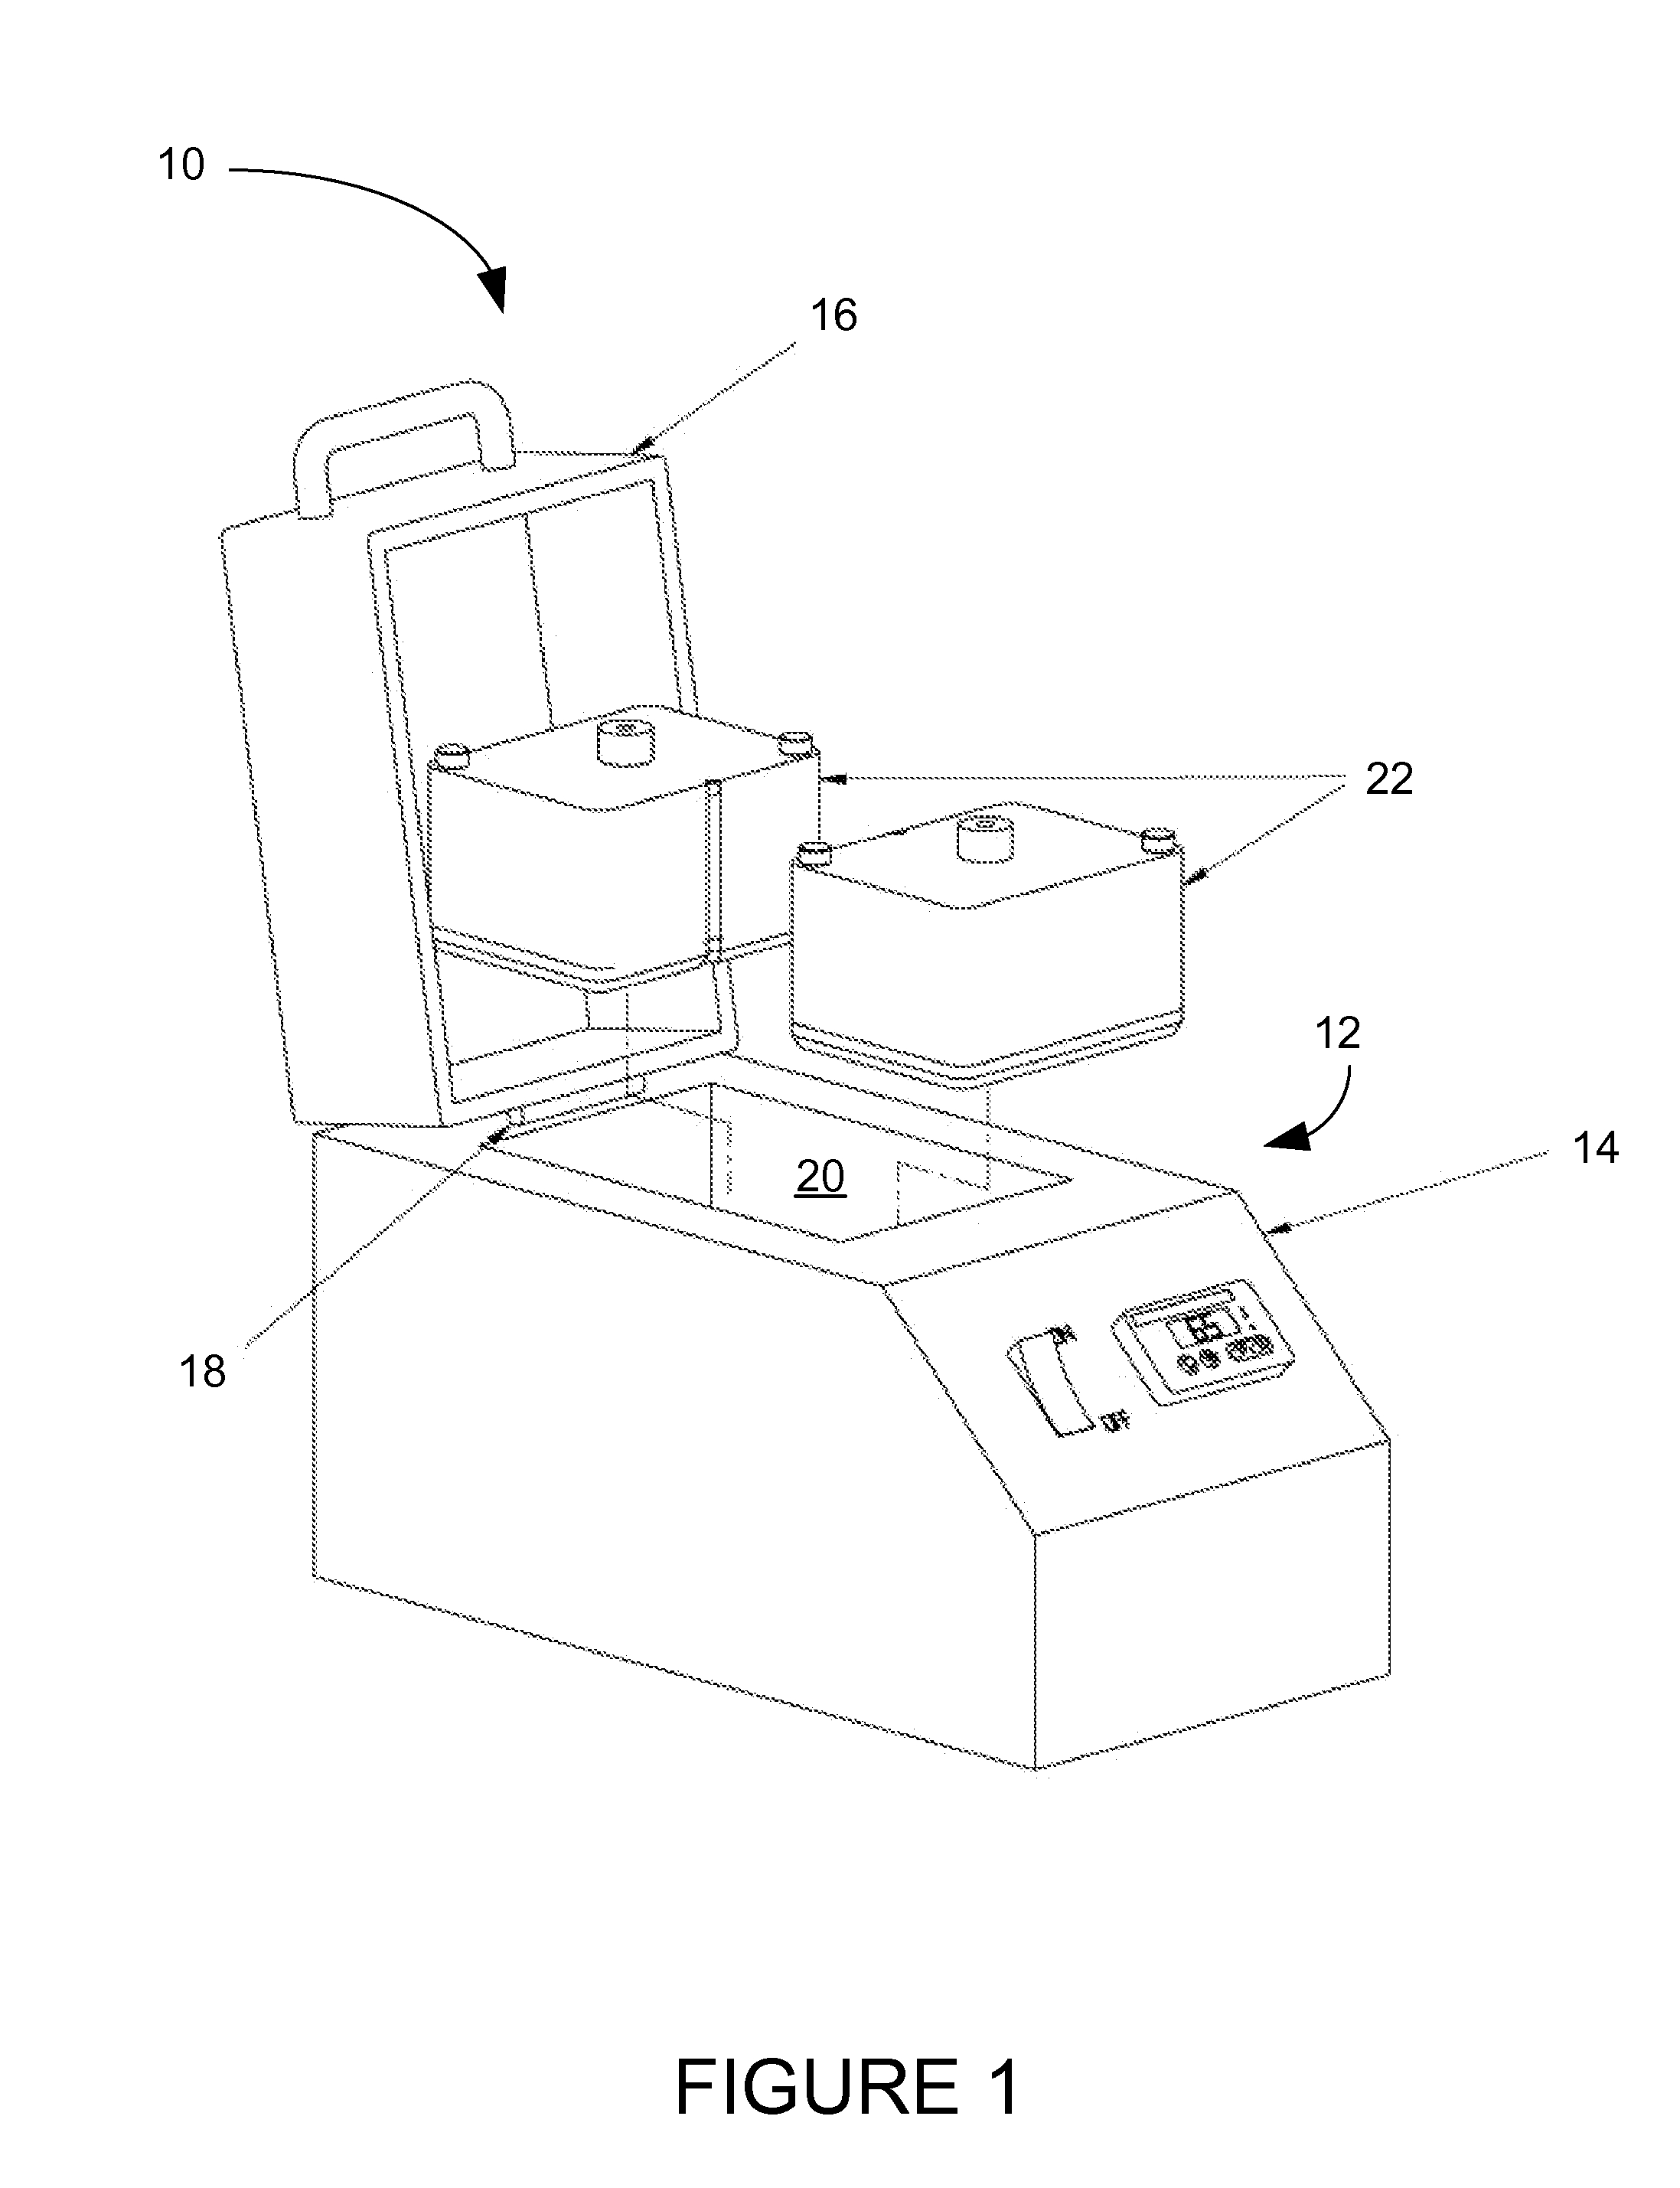 Microscope slide incubation and processing system